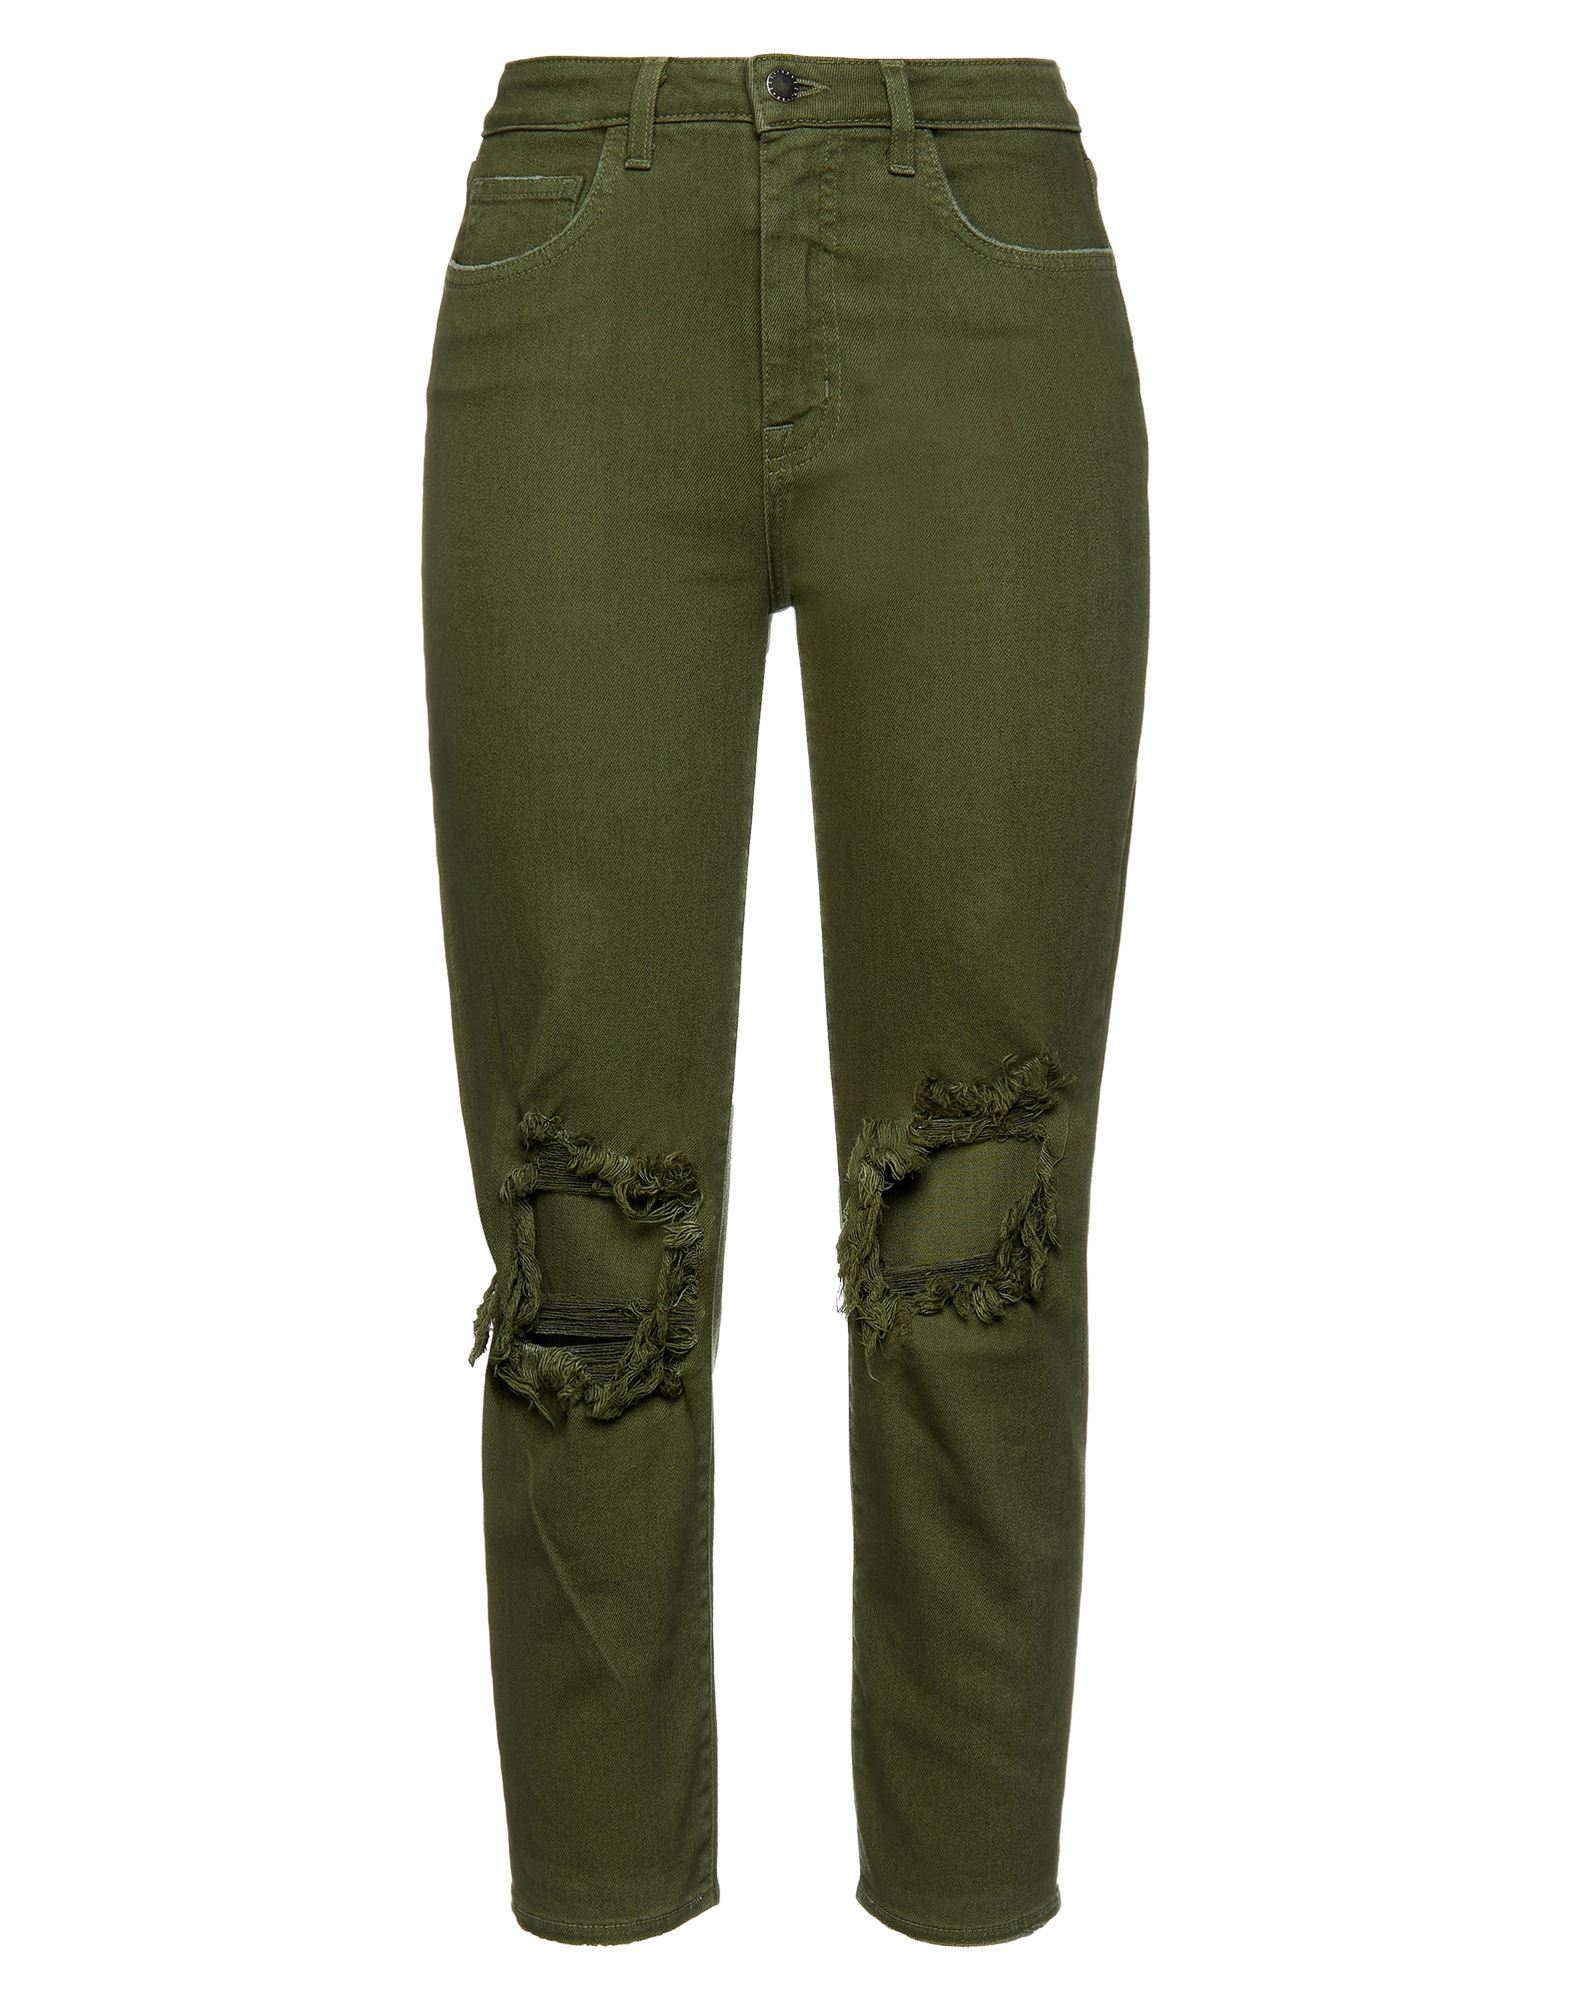 L Agence L'agence Woman Denim Cropped Military Green Size 25 Cotton, Elastane